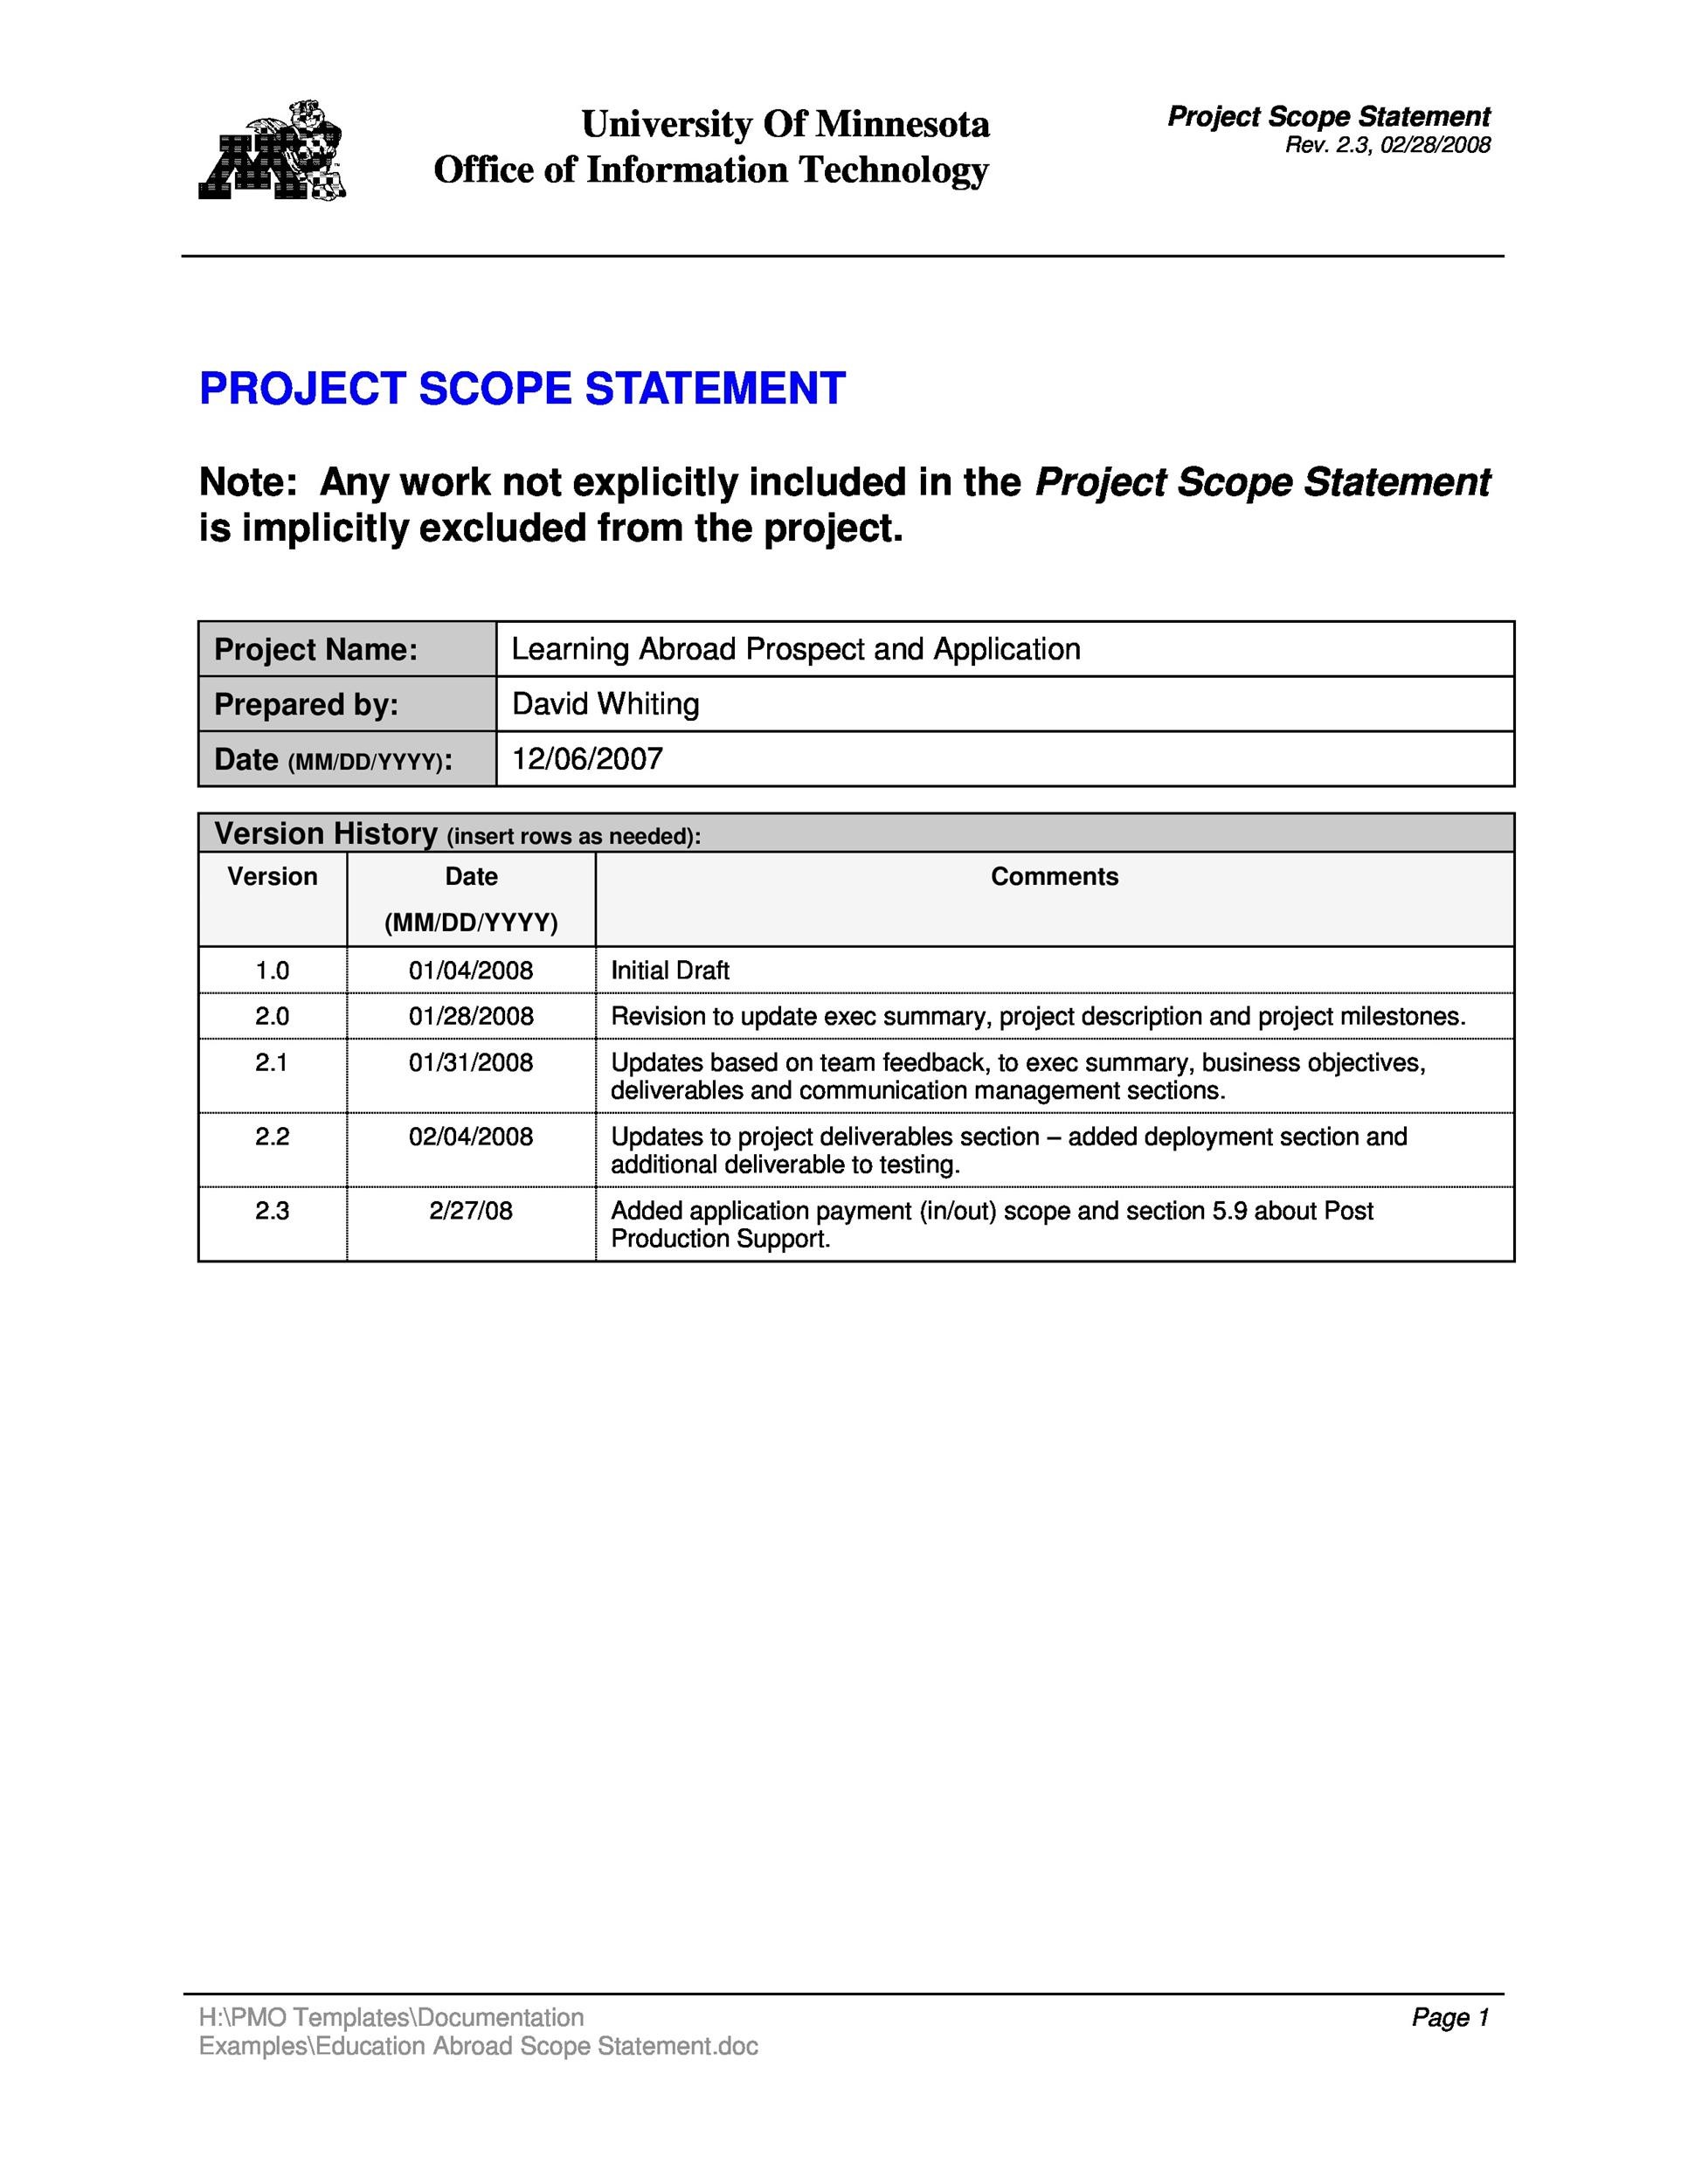 43 Project Scope Statement Templates & Examples ᐅ TemplateLab